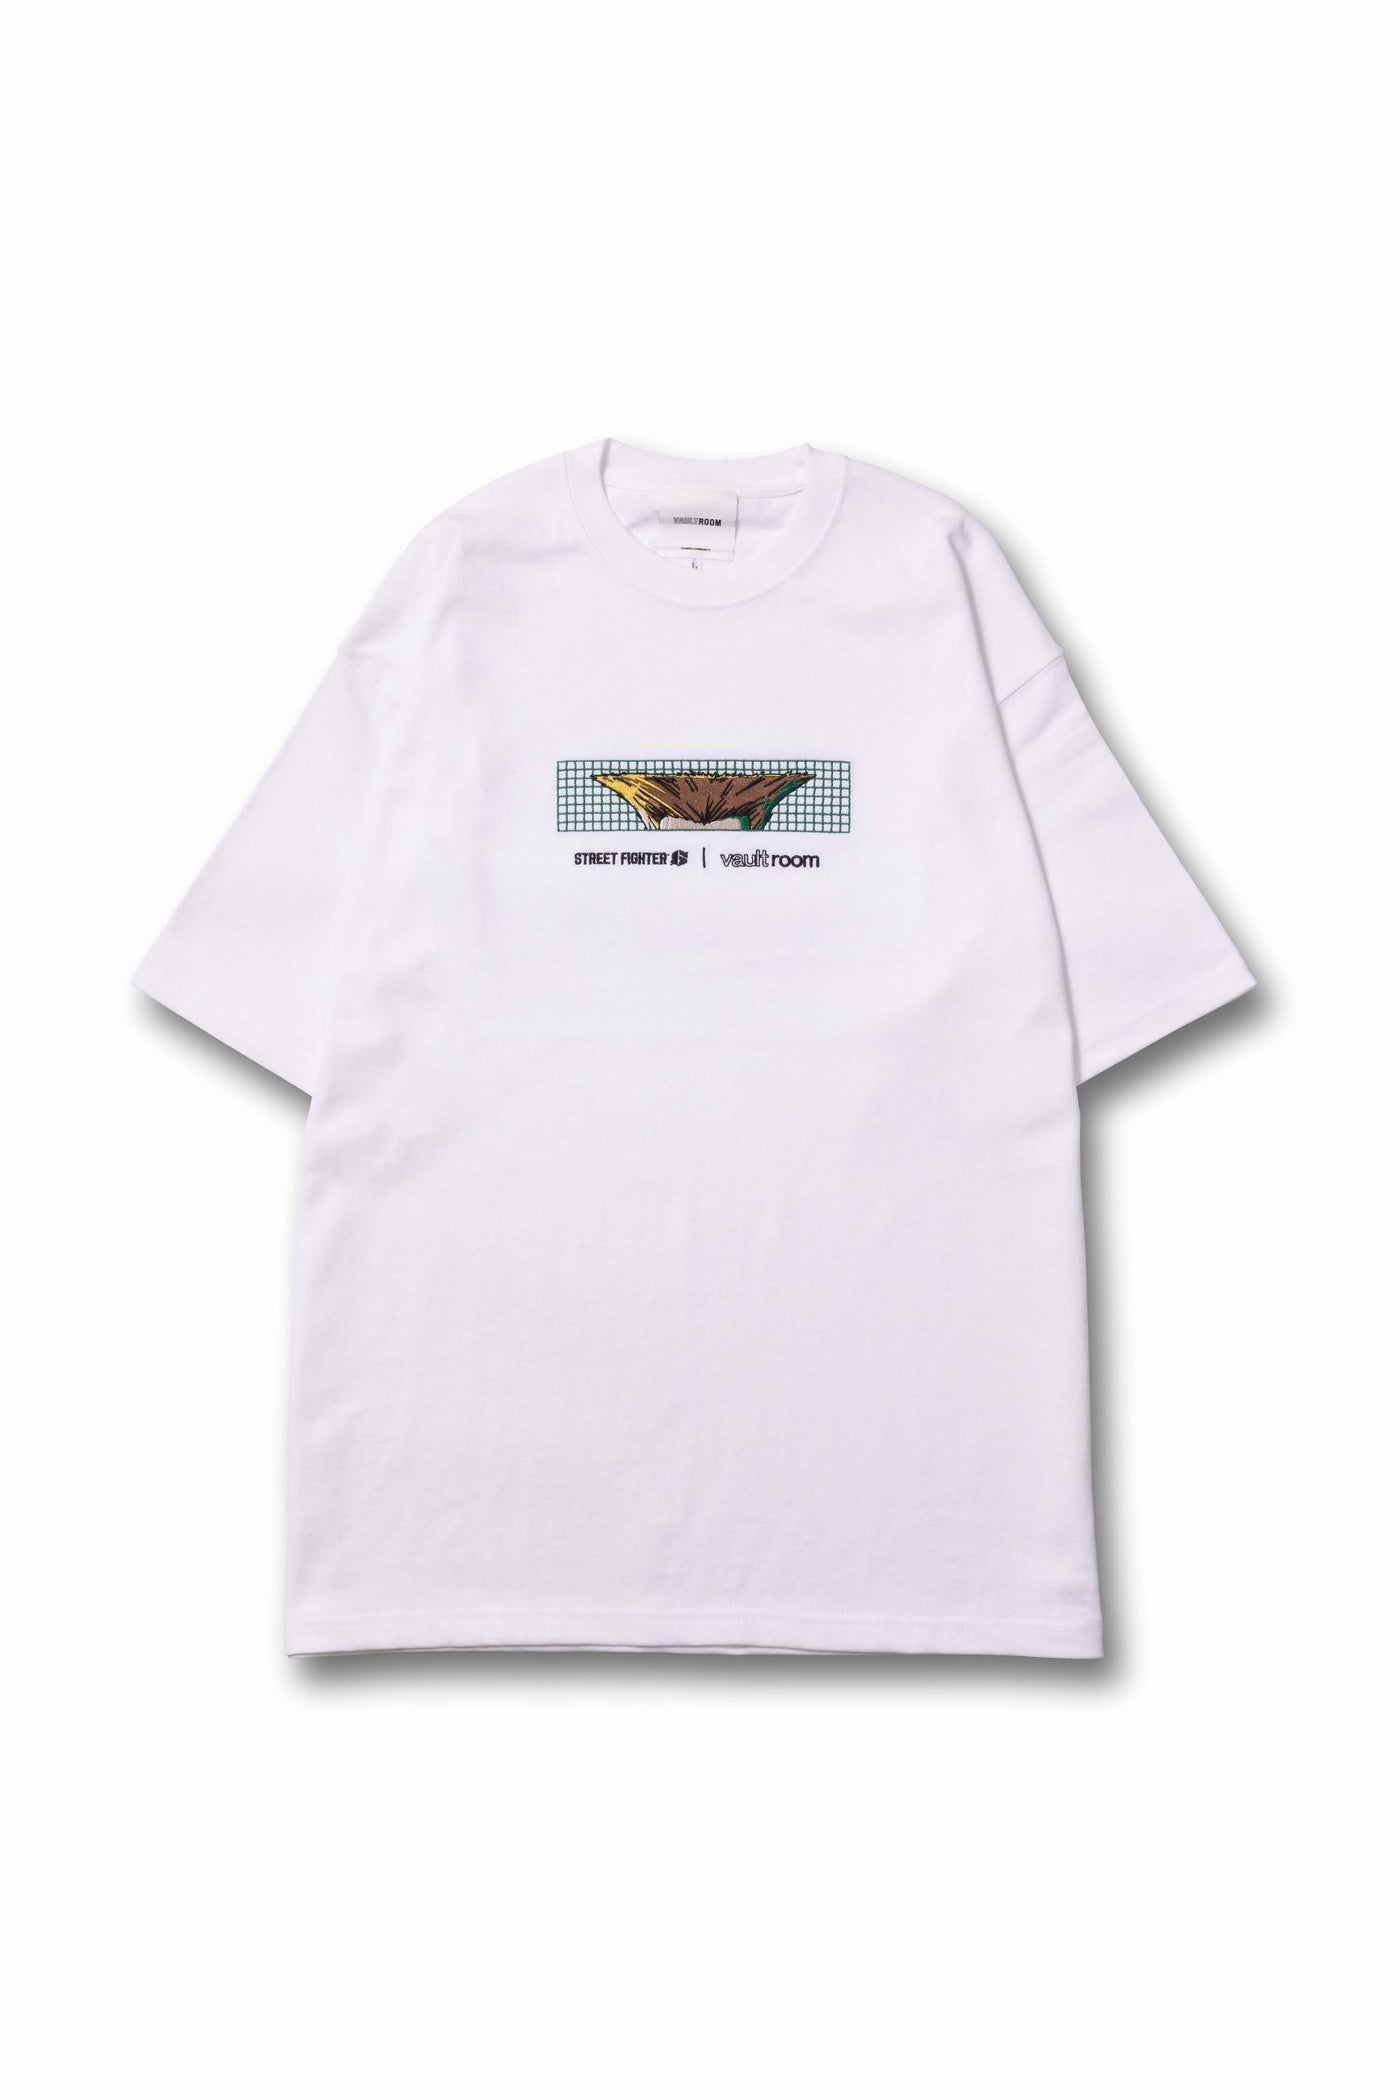 vaultroom street fighter GUILE TEE / WHT-www.coumes-spring.co.uk